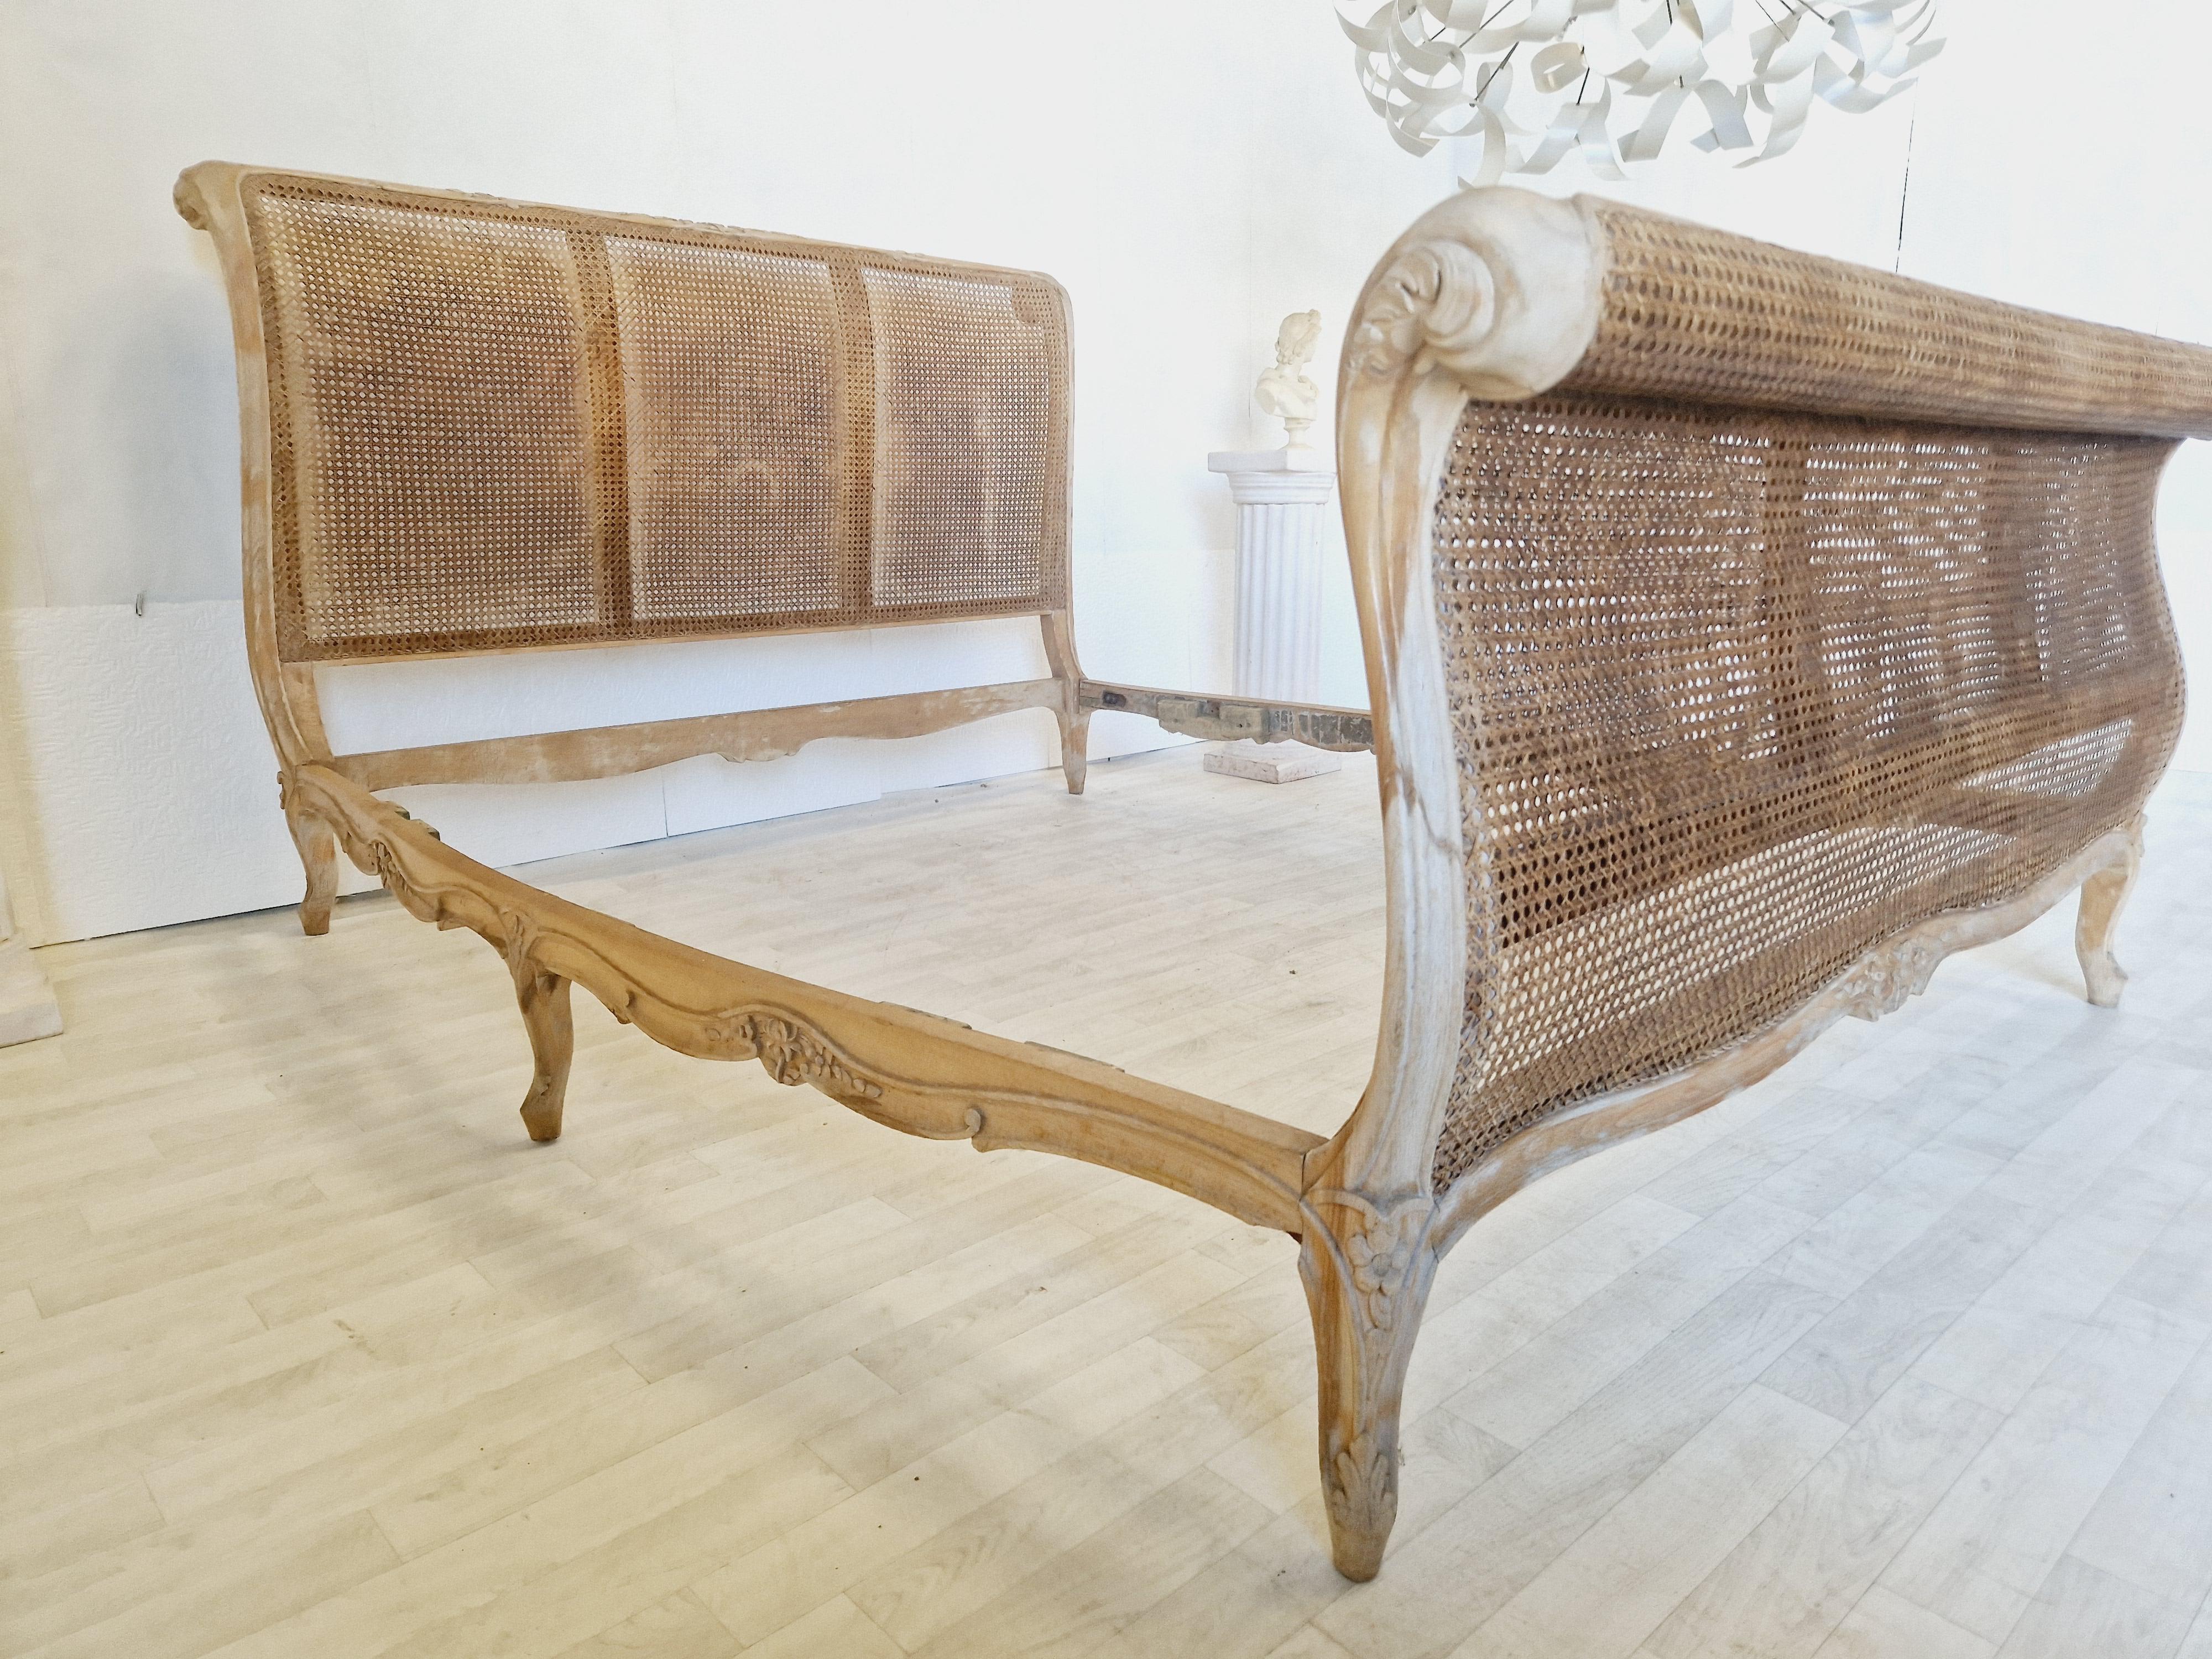 Antique French Cane Bed Louis XV Sleigh Style In Good Condition For Sale In Buxton, GB